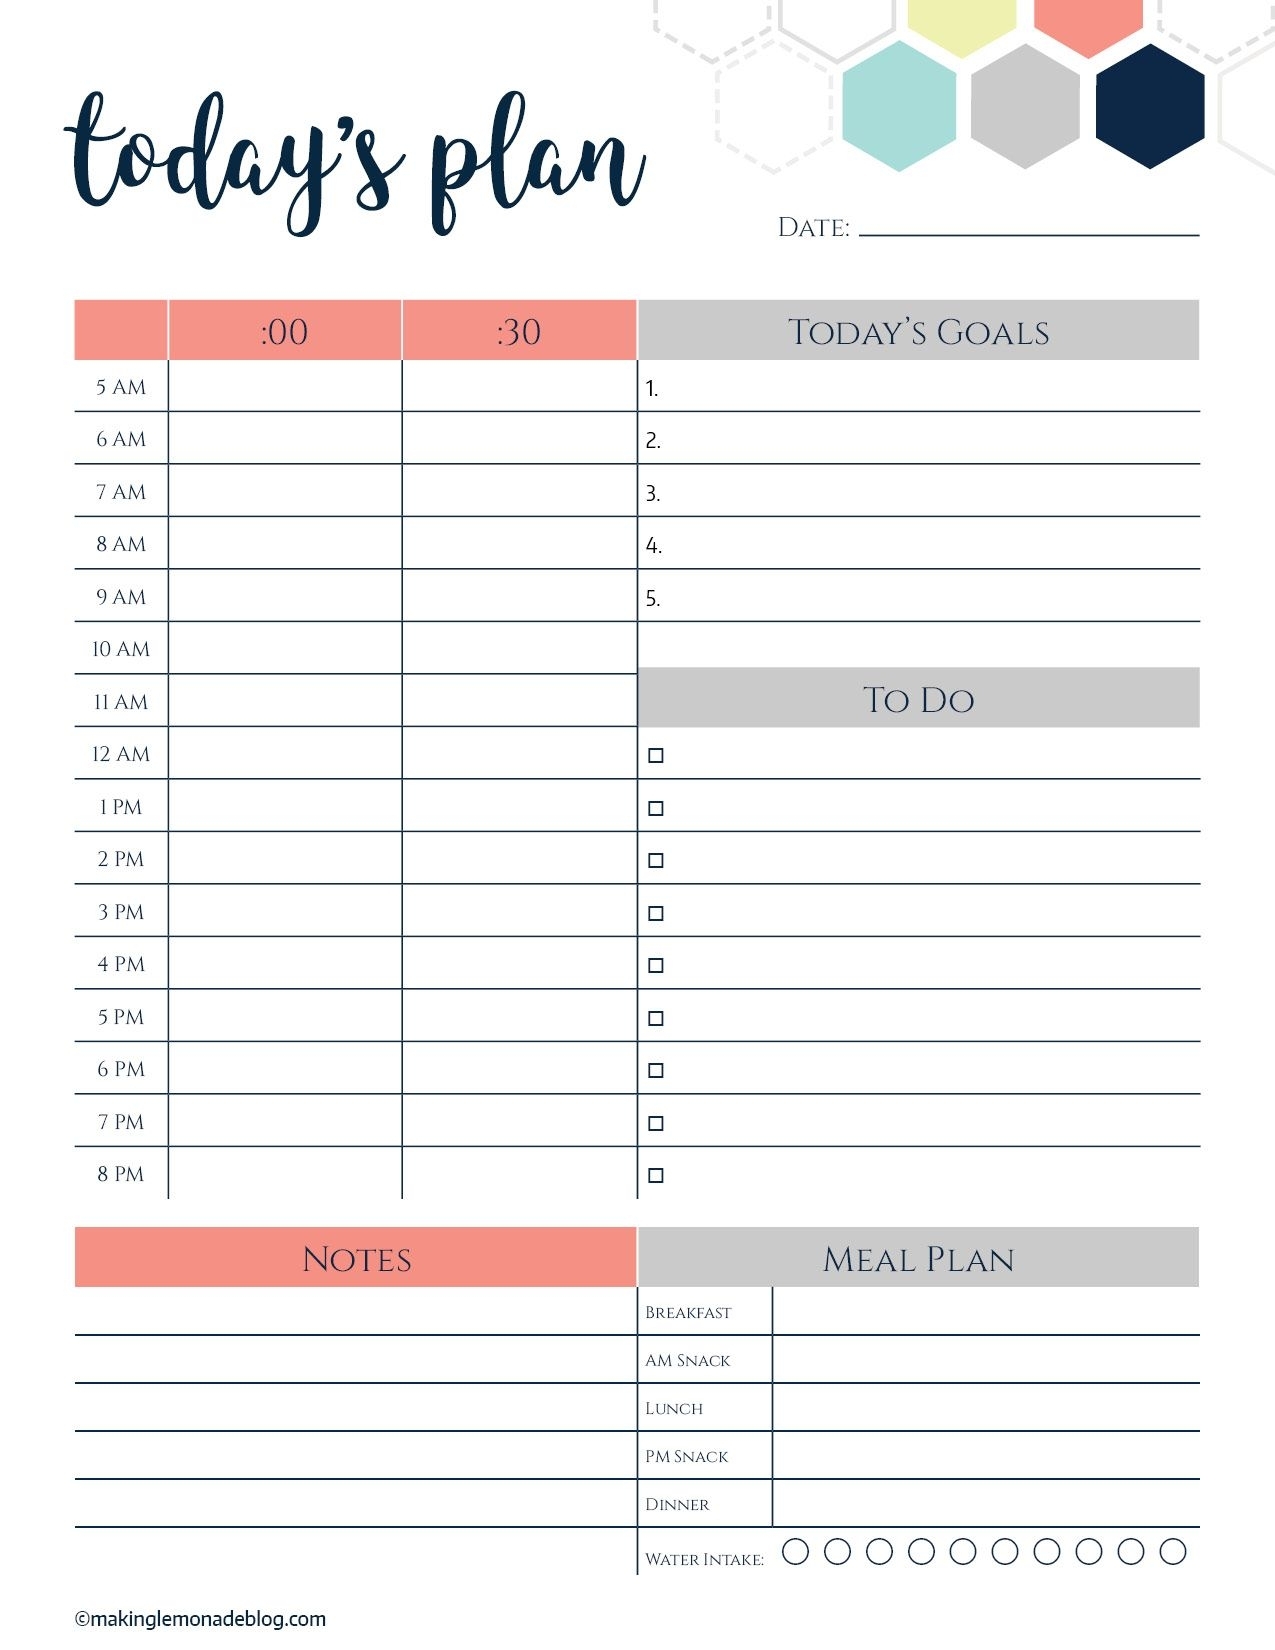 This Free Printable Daily Planner Changes Everything. Finally A Way inside Online Daily Time Slot Planner